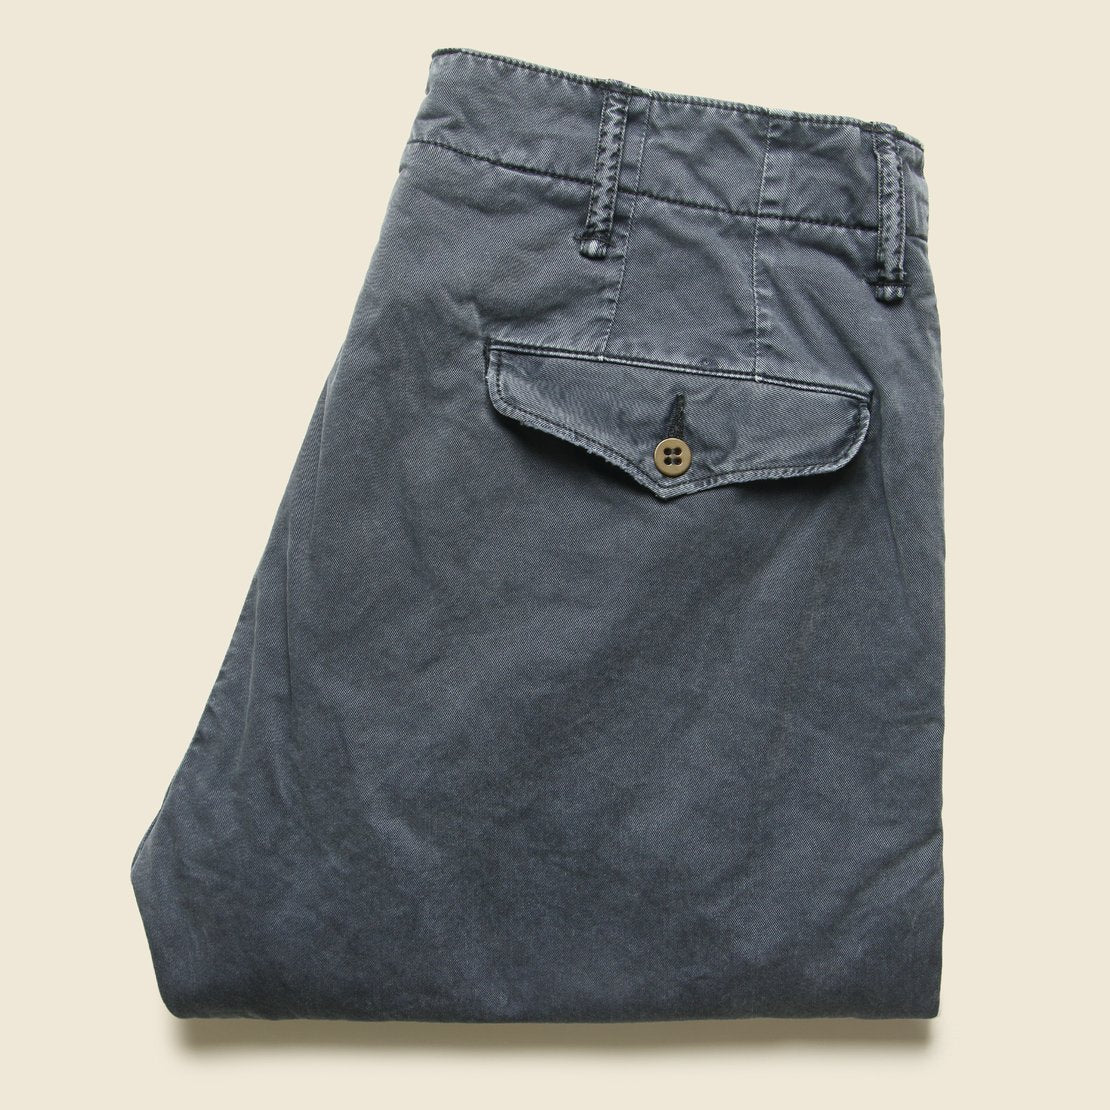 Officer Chino - Military Blue - RRL - STAG Provisions - Pants - Twill